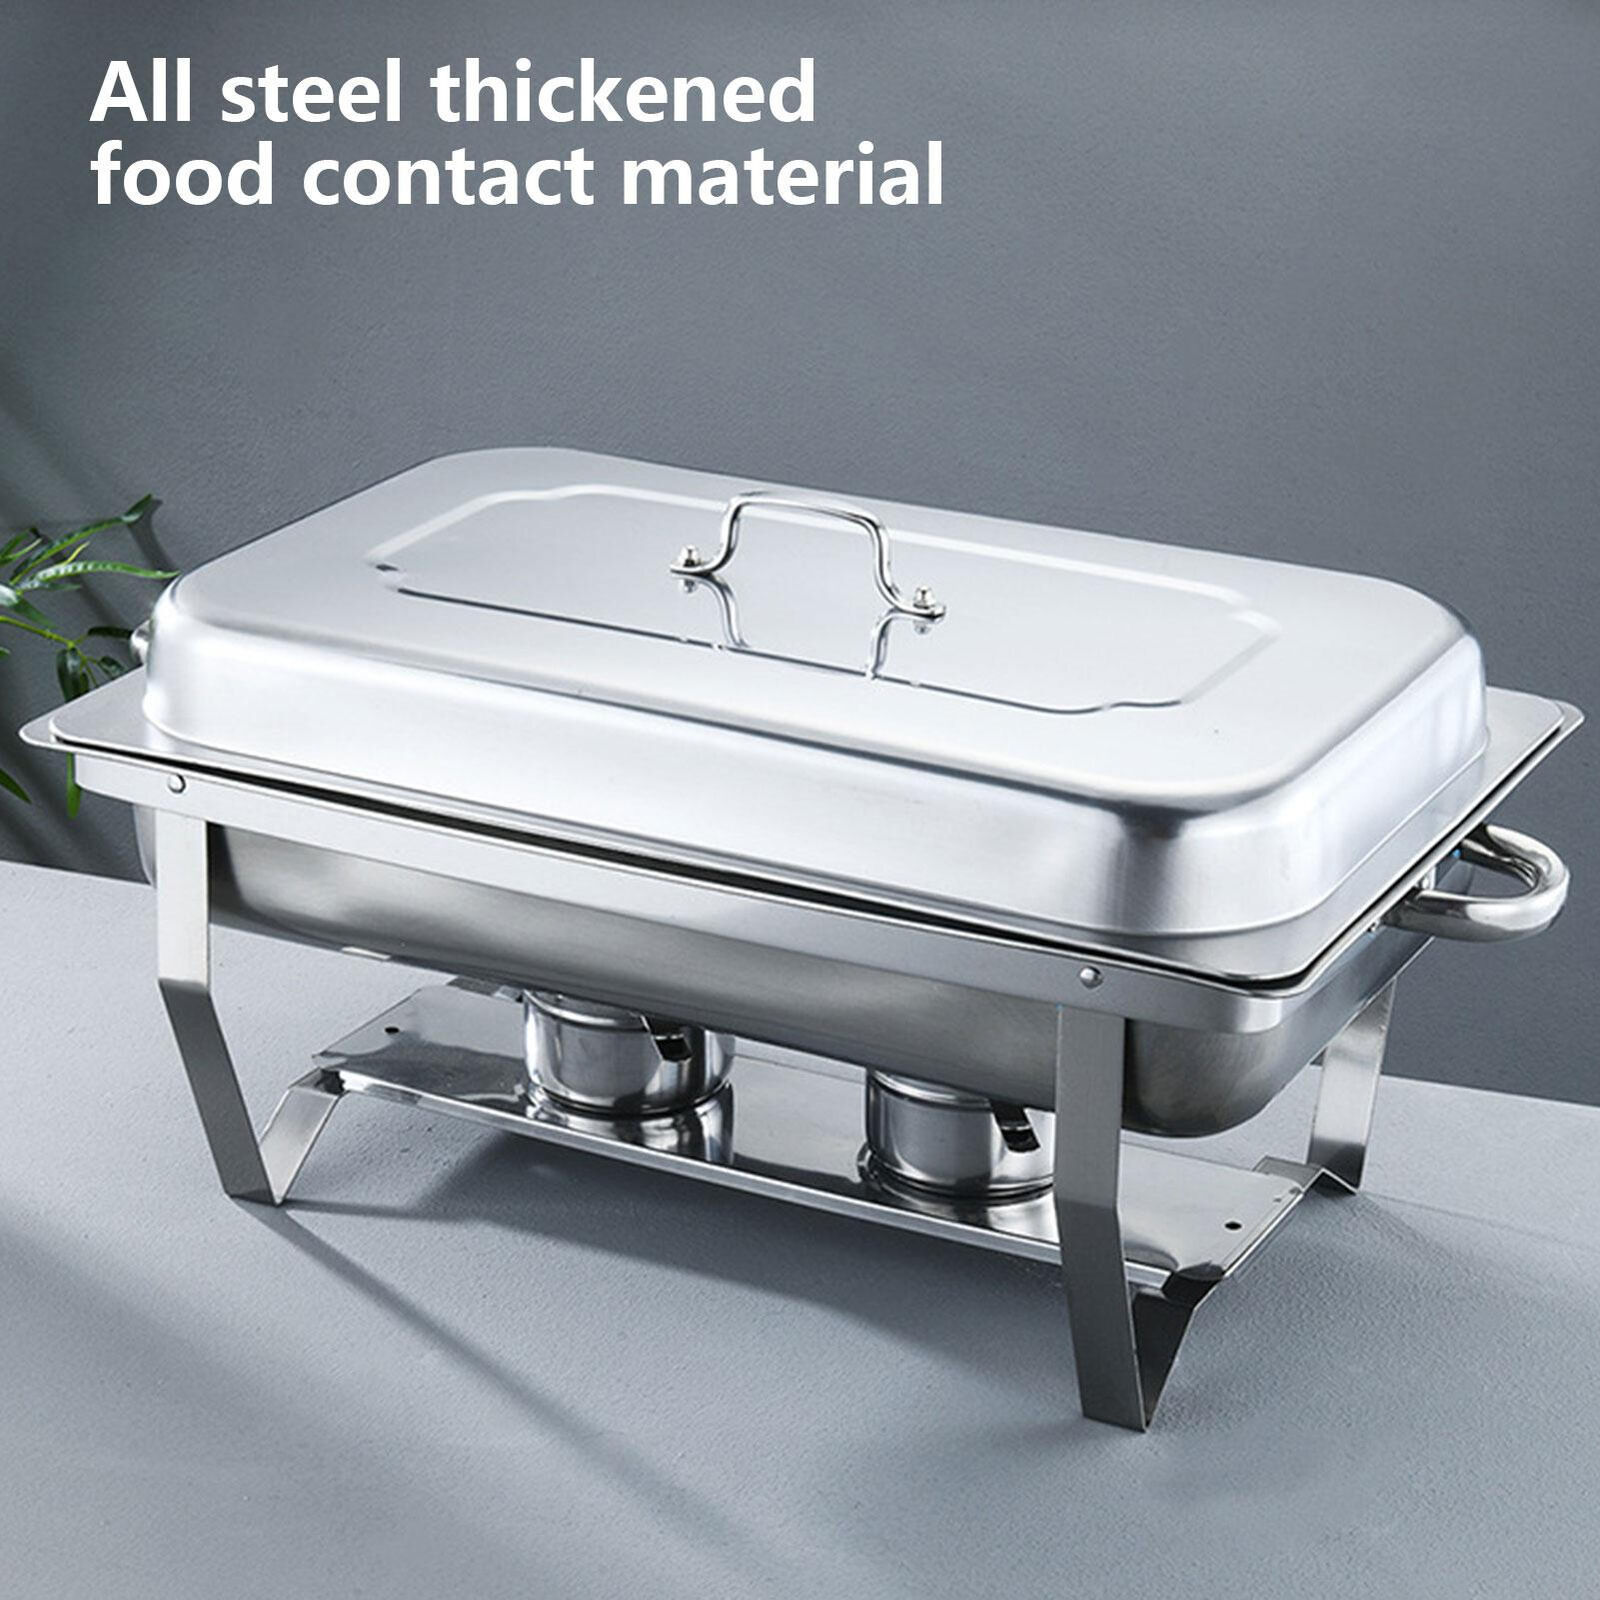 4pcs Buffet Food Warmer Set Square Stainless Steel Non Stick Chafing Dish Set 